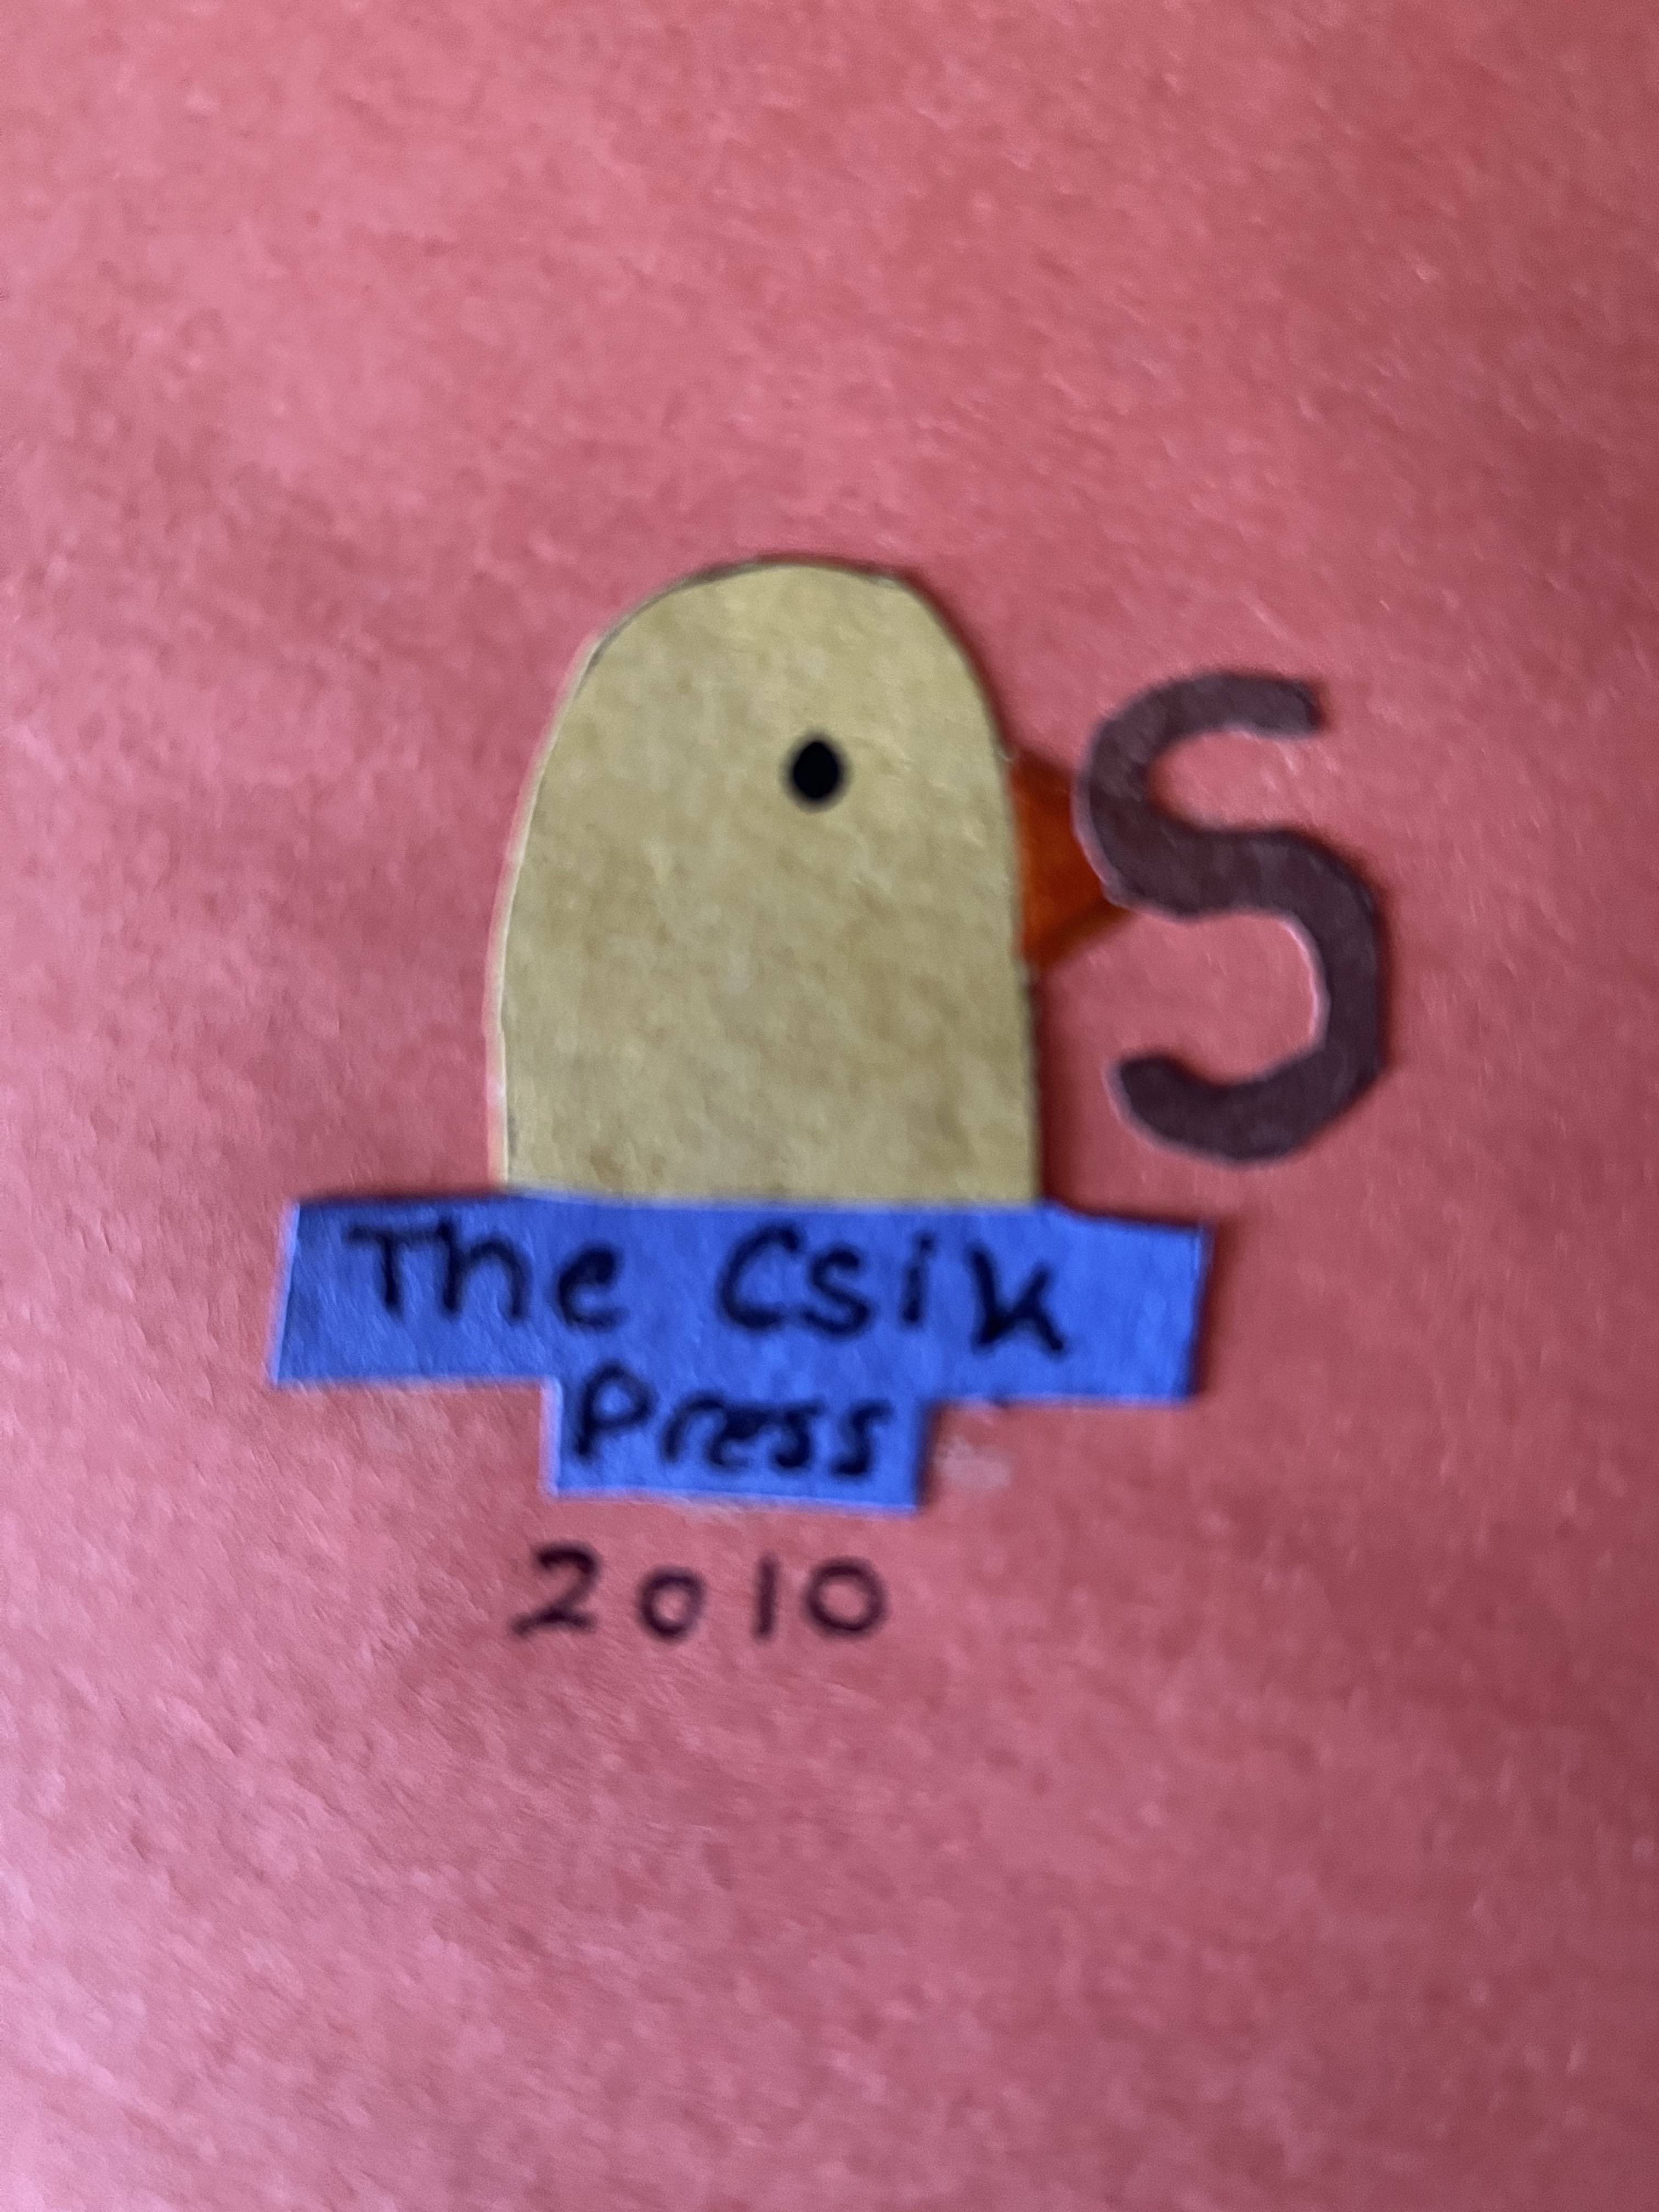 The back of a handmade card made of construction paper. A yellow chick with an orange beak holds an 'S'-shaped worm in its beak. It sits on top of the text, 'The Csik Press'. Below this, the year '2010' is written in pen.